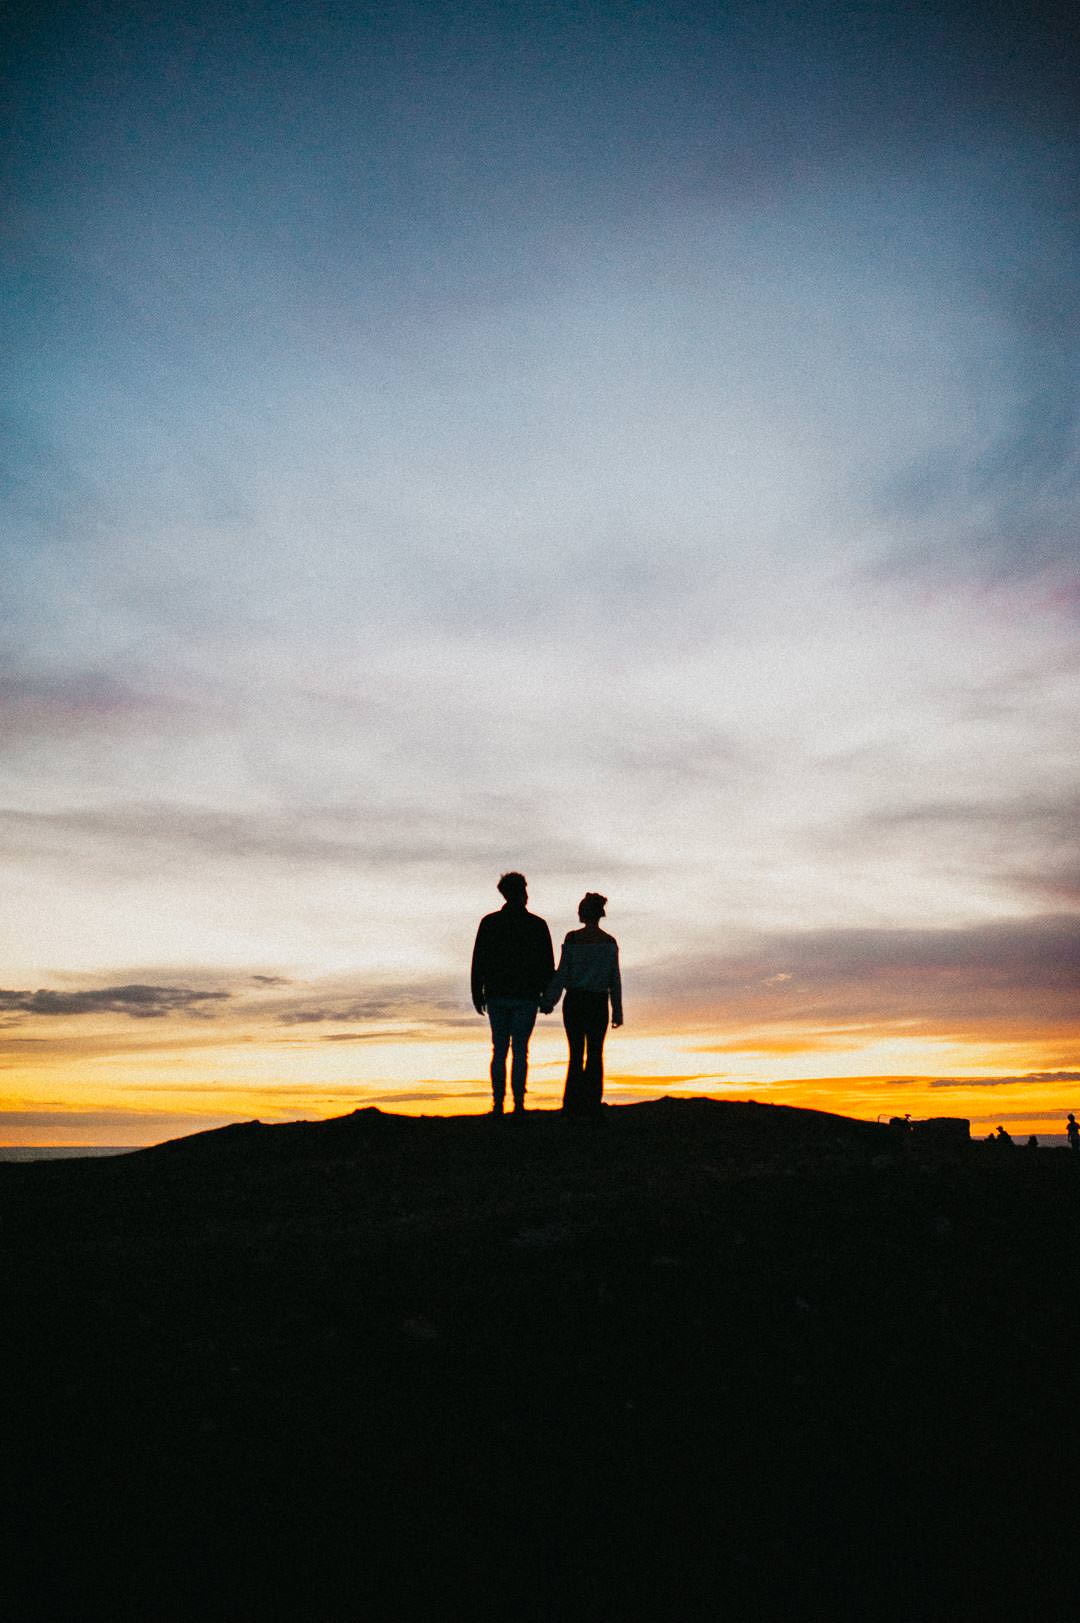 man and woman stood on hill silhouette